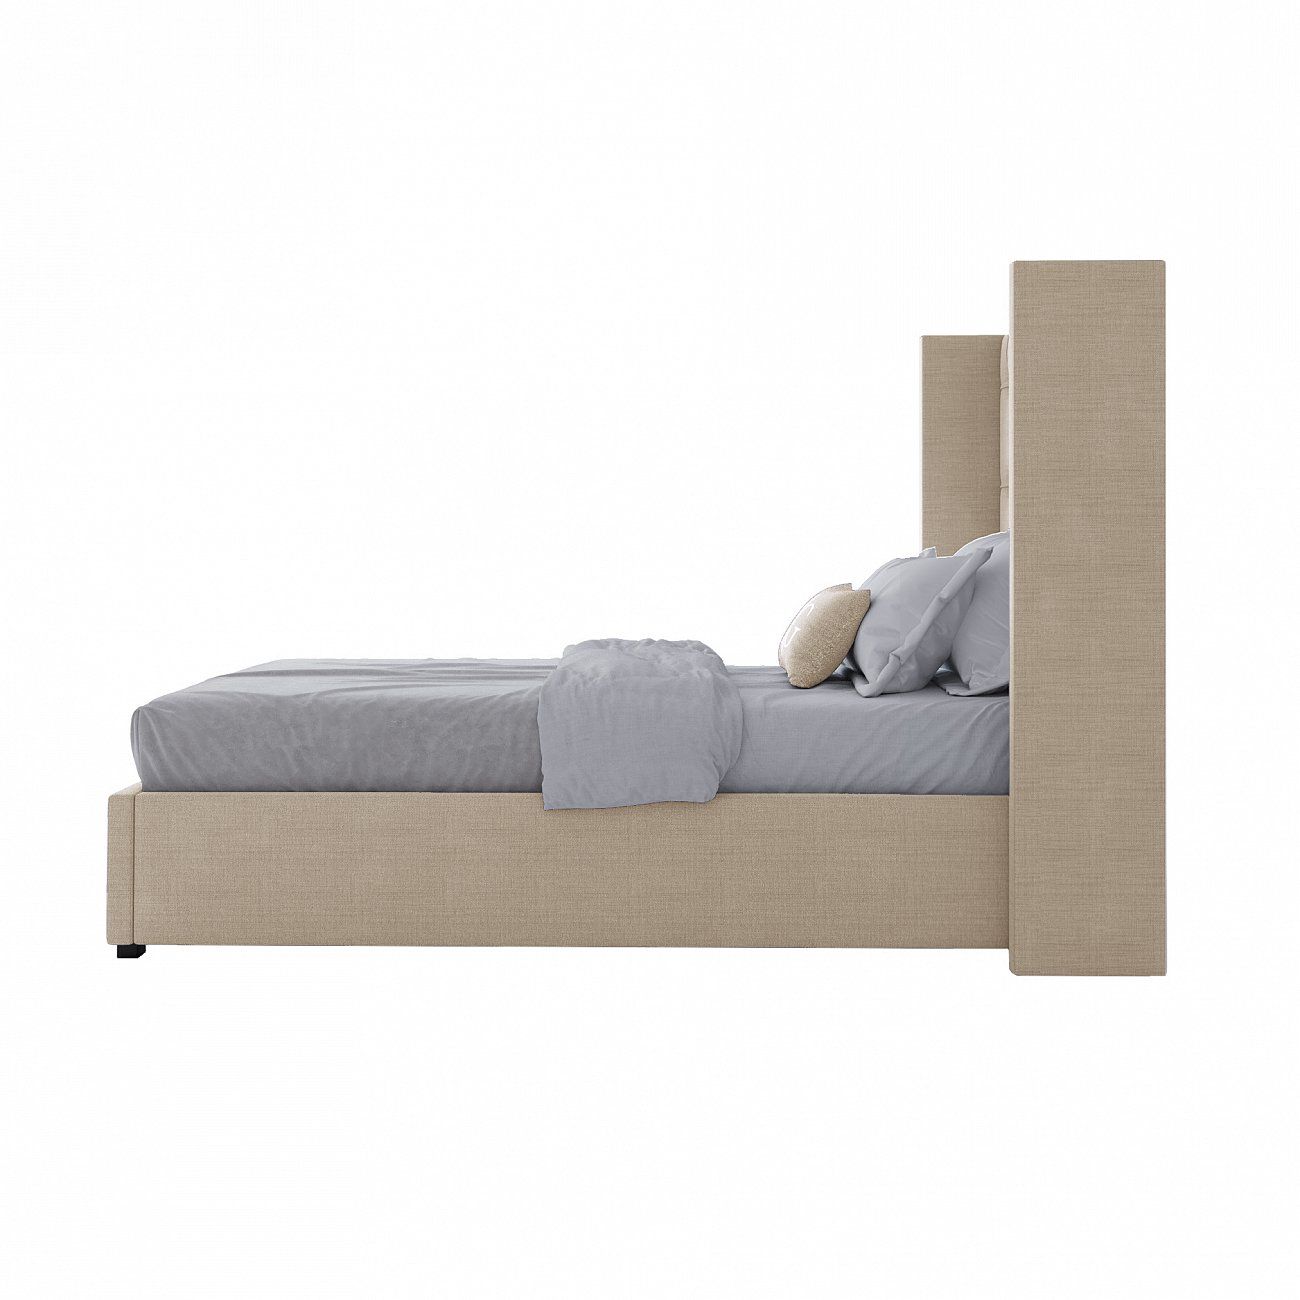 Wing-2 single bed with upholstered headboard 90x200 cm milk